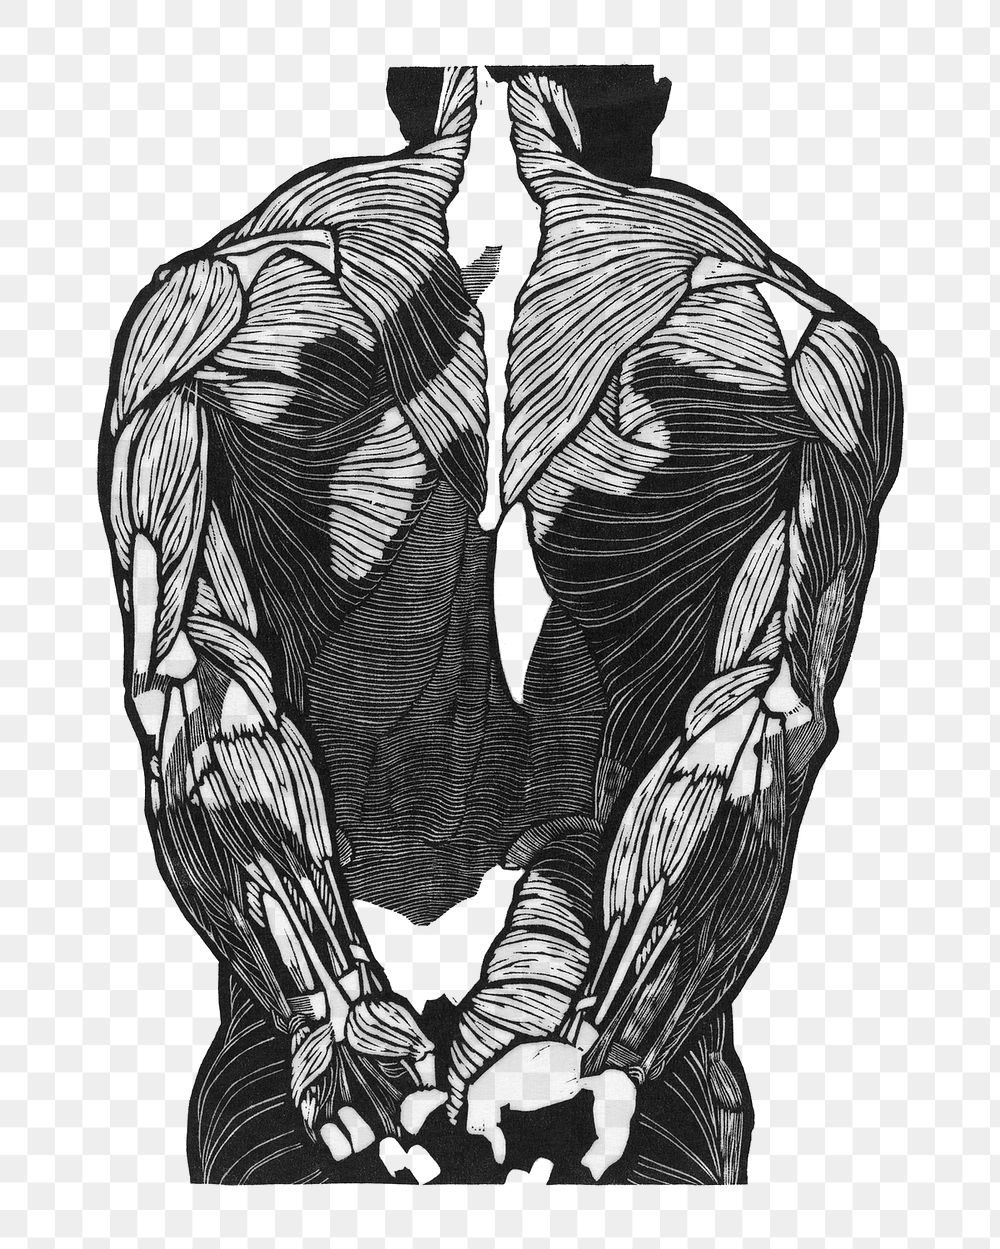 Back muscles png human anatomy, remixed from artworks by Reijer Stolk